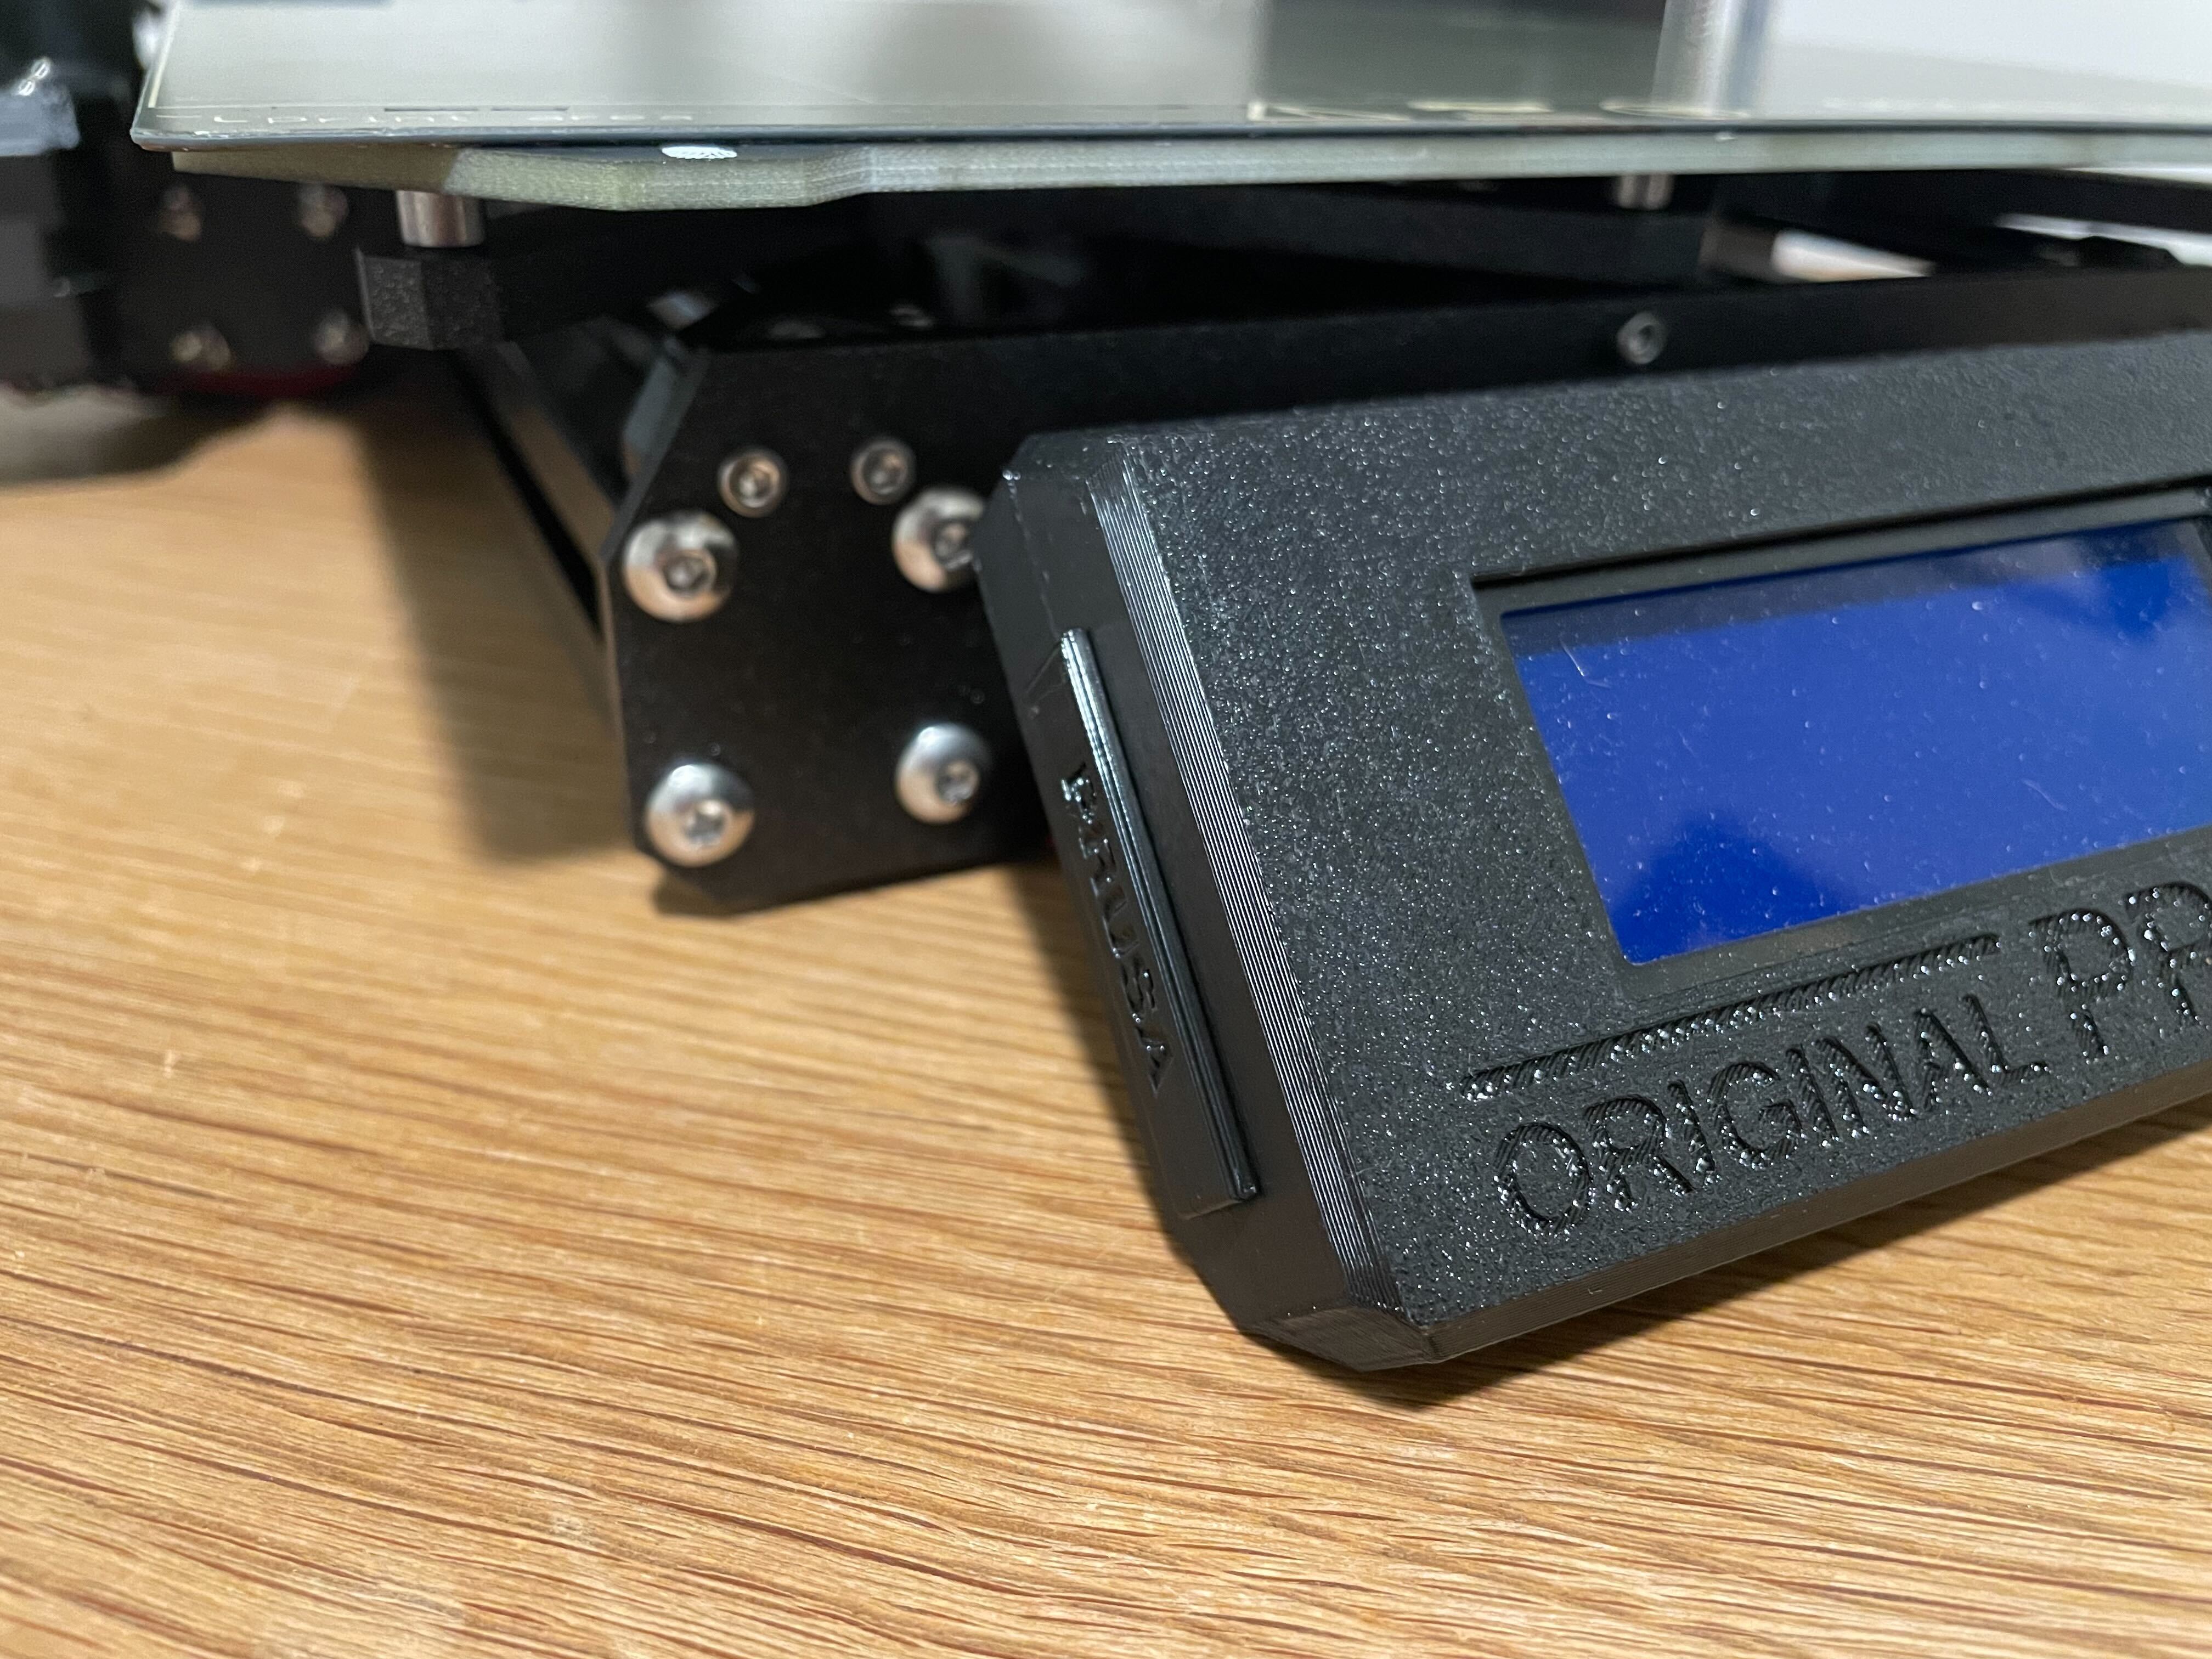 Prusa SD Card Dust Cover